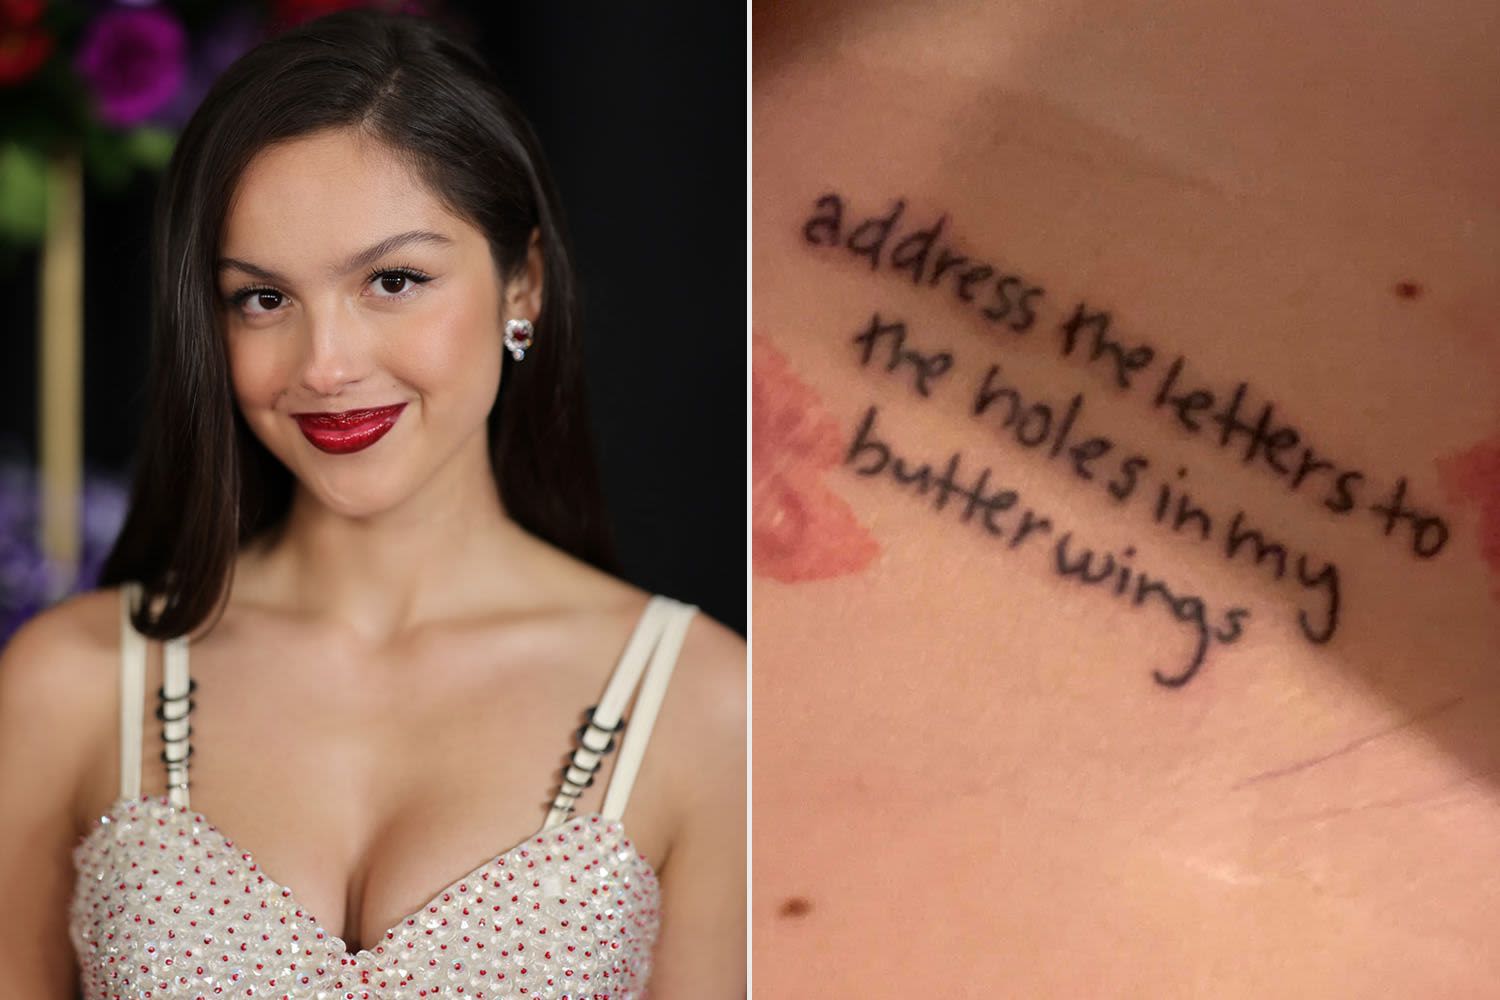 Olivia Rodrigo Responds to Fan Whose Tattoo Typo Went Viral: 'This Is the New Lyric'